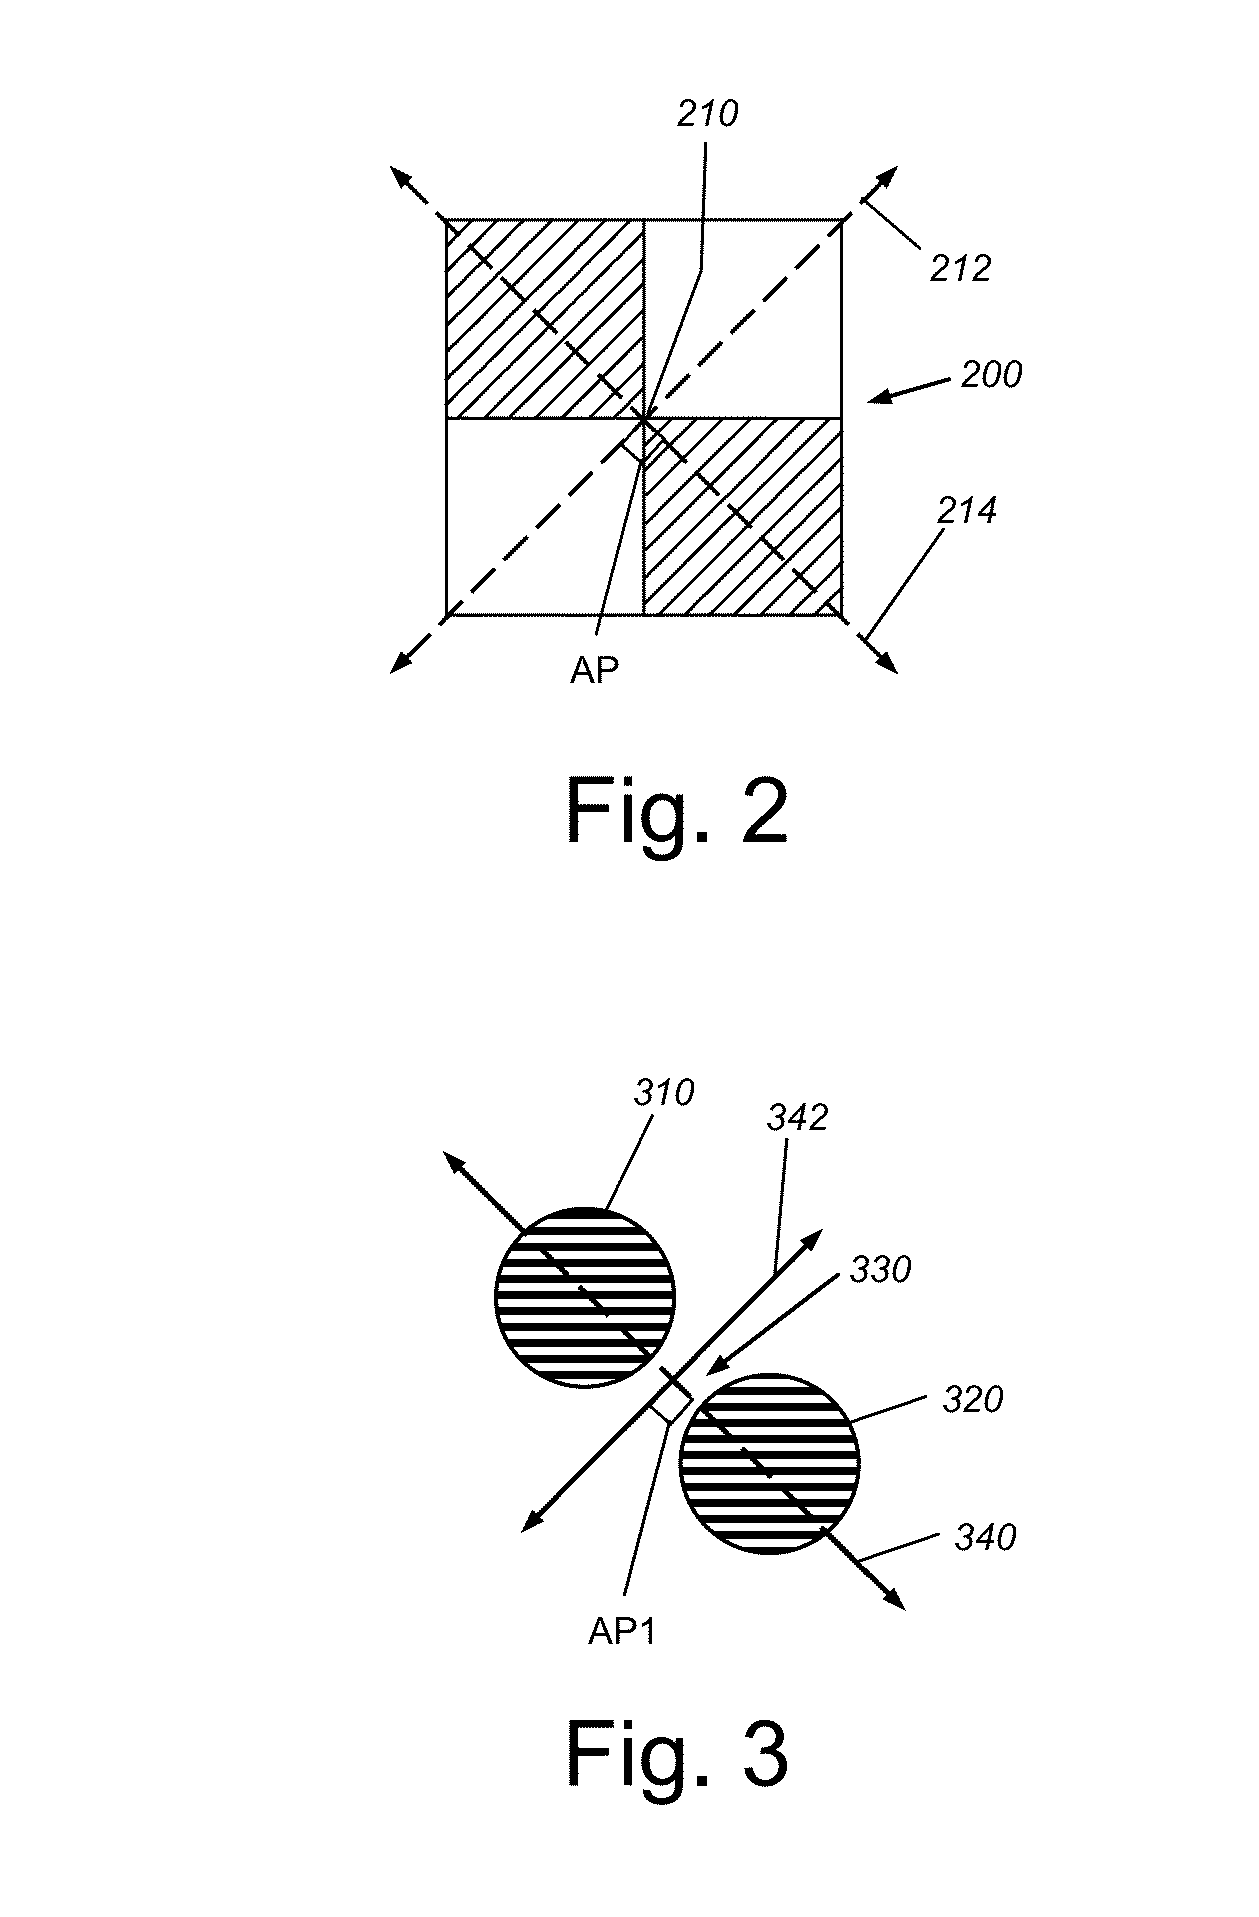 System and method for finding saddle point-like structures in an image and determining information from the same